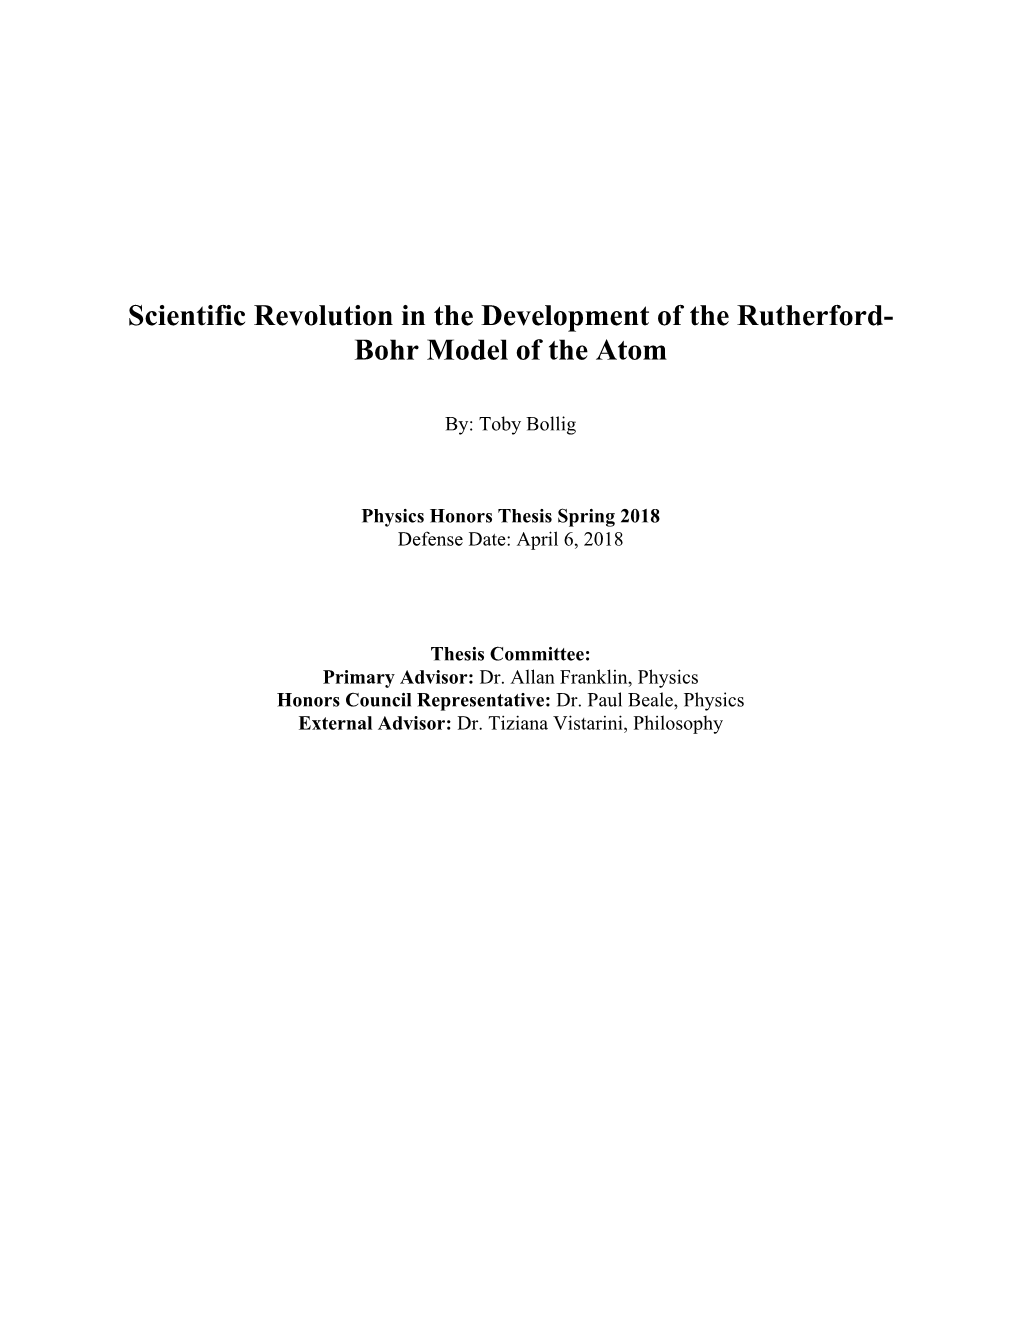 Scientific Revolution in the Development of the Rutherford- Bohr Model of the Atom